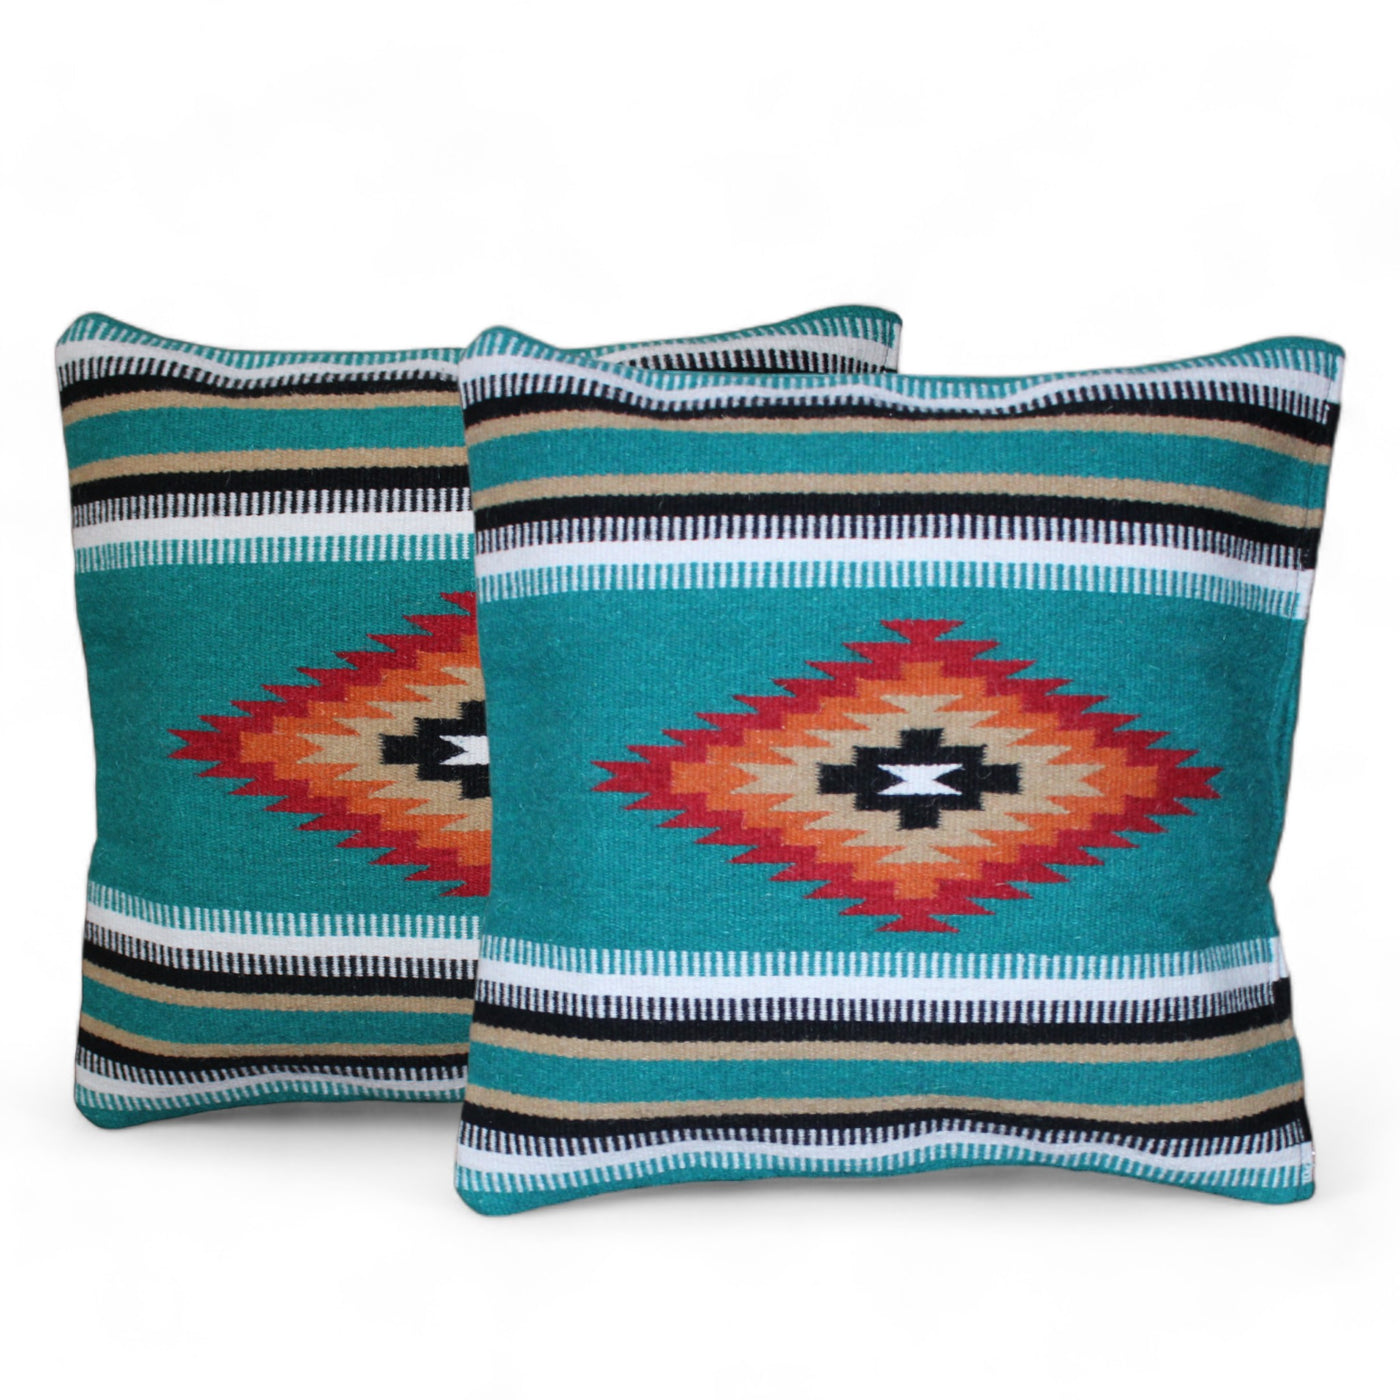 20 X 20 Handwoven Wool Southwestern Pillows - Western Pillow Covers